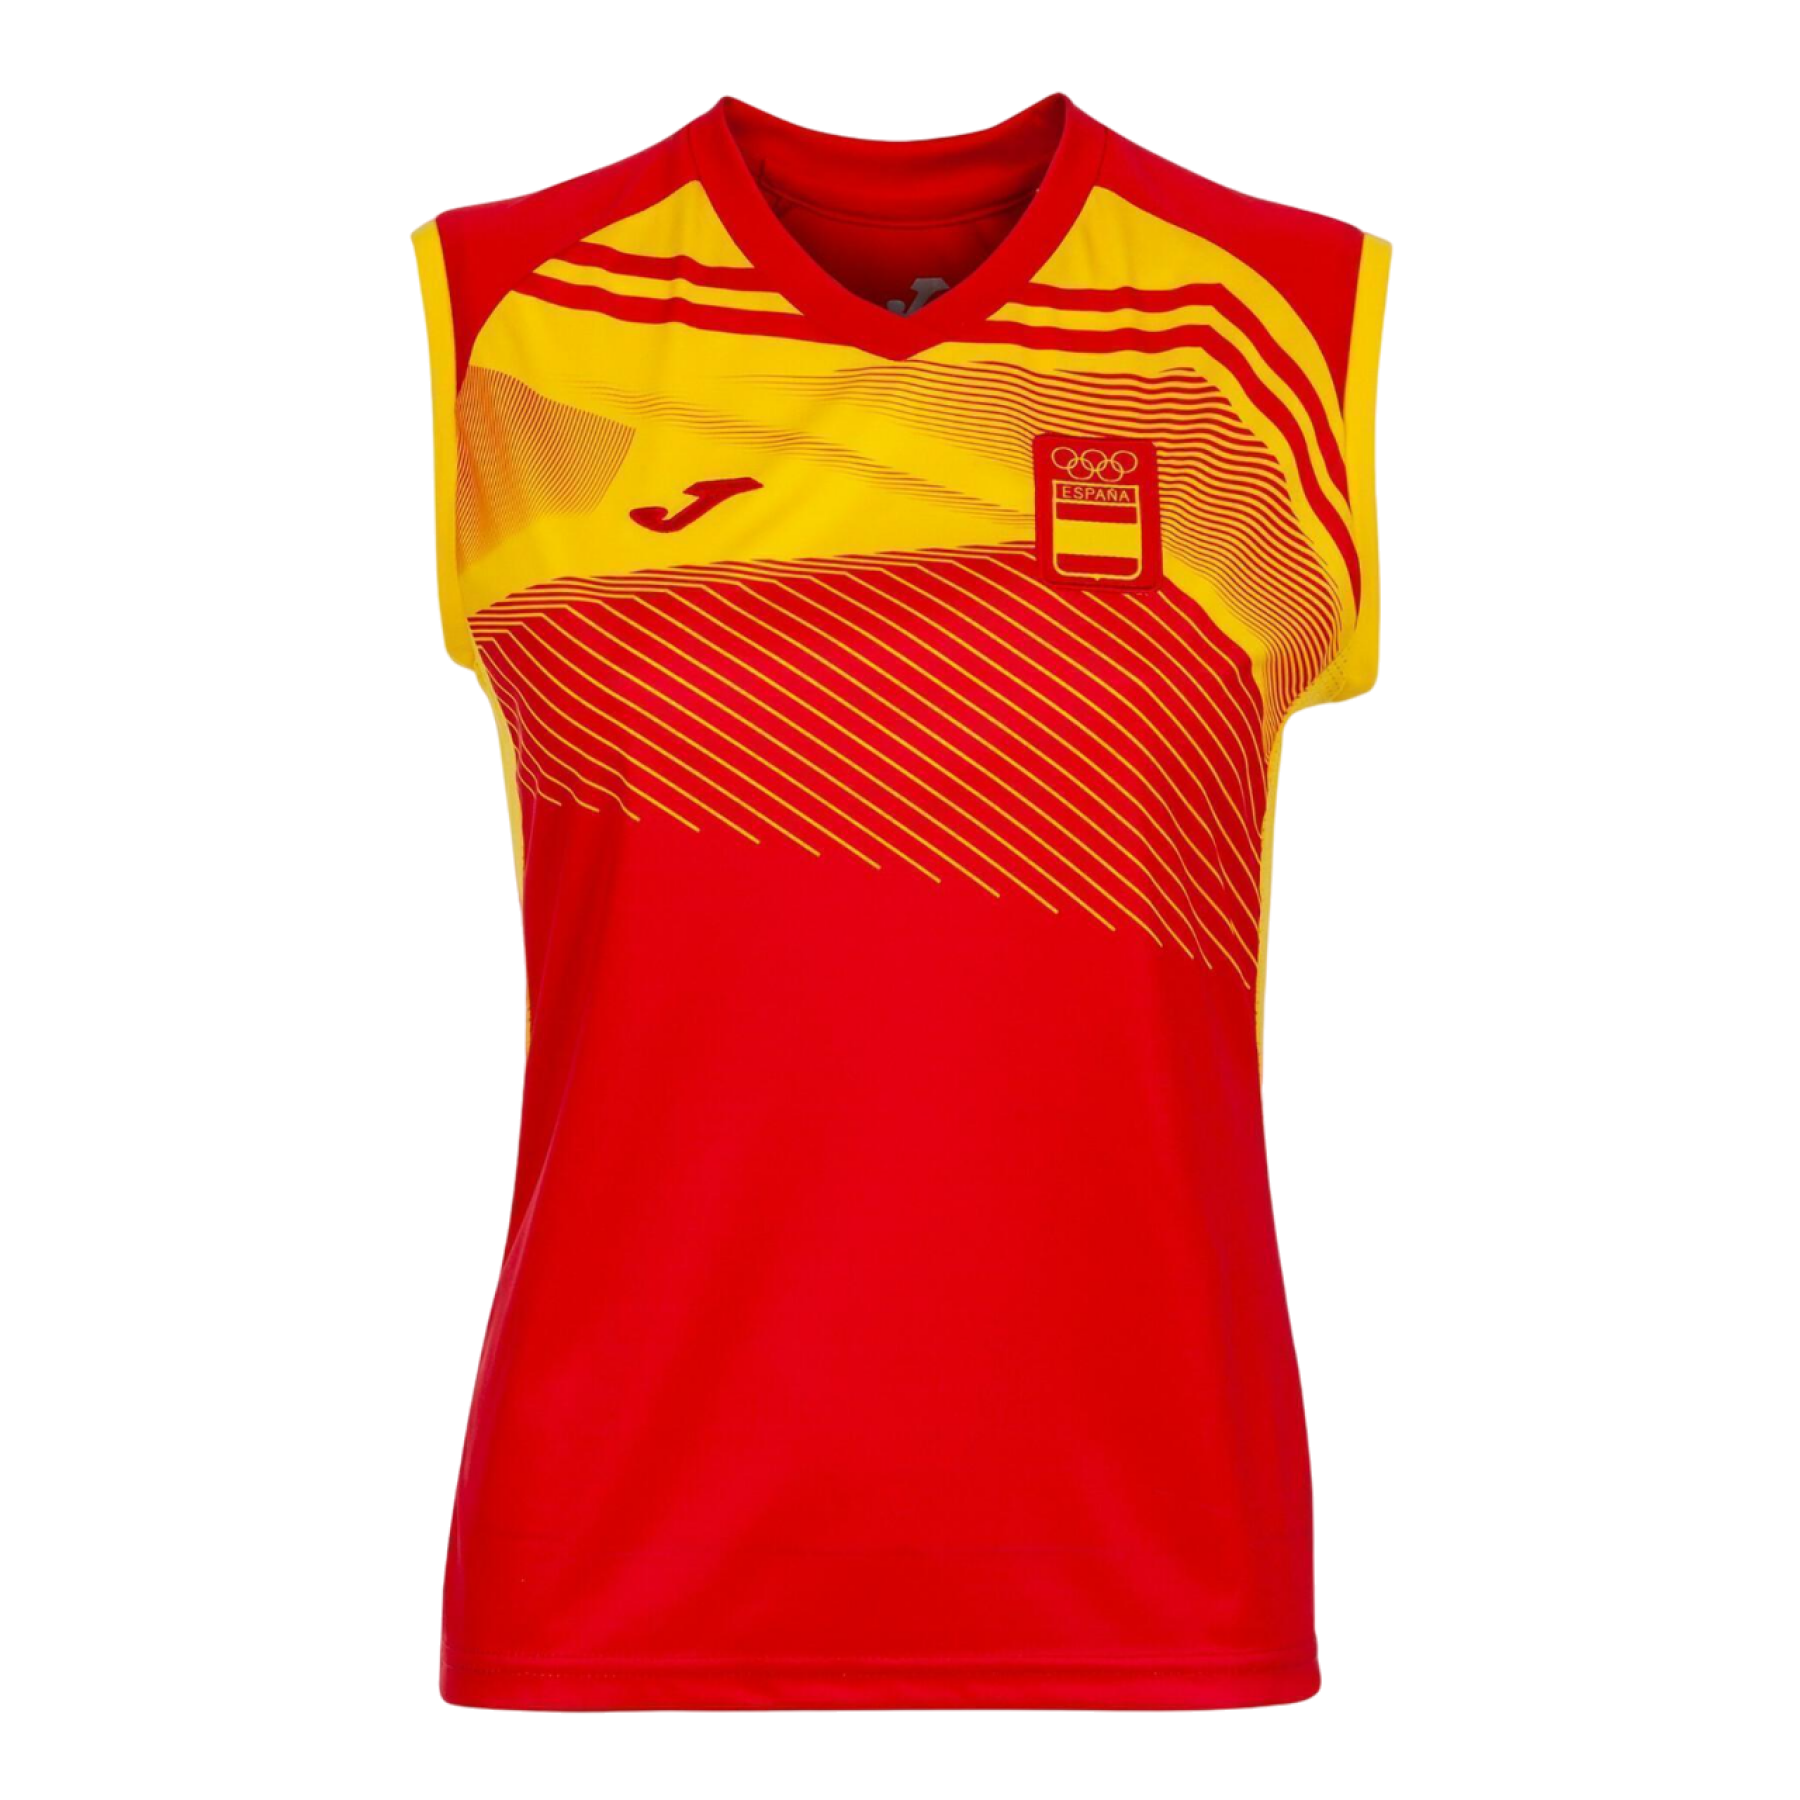 Spanish Olympic Committee tank top paseo